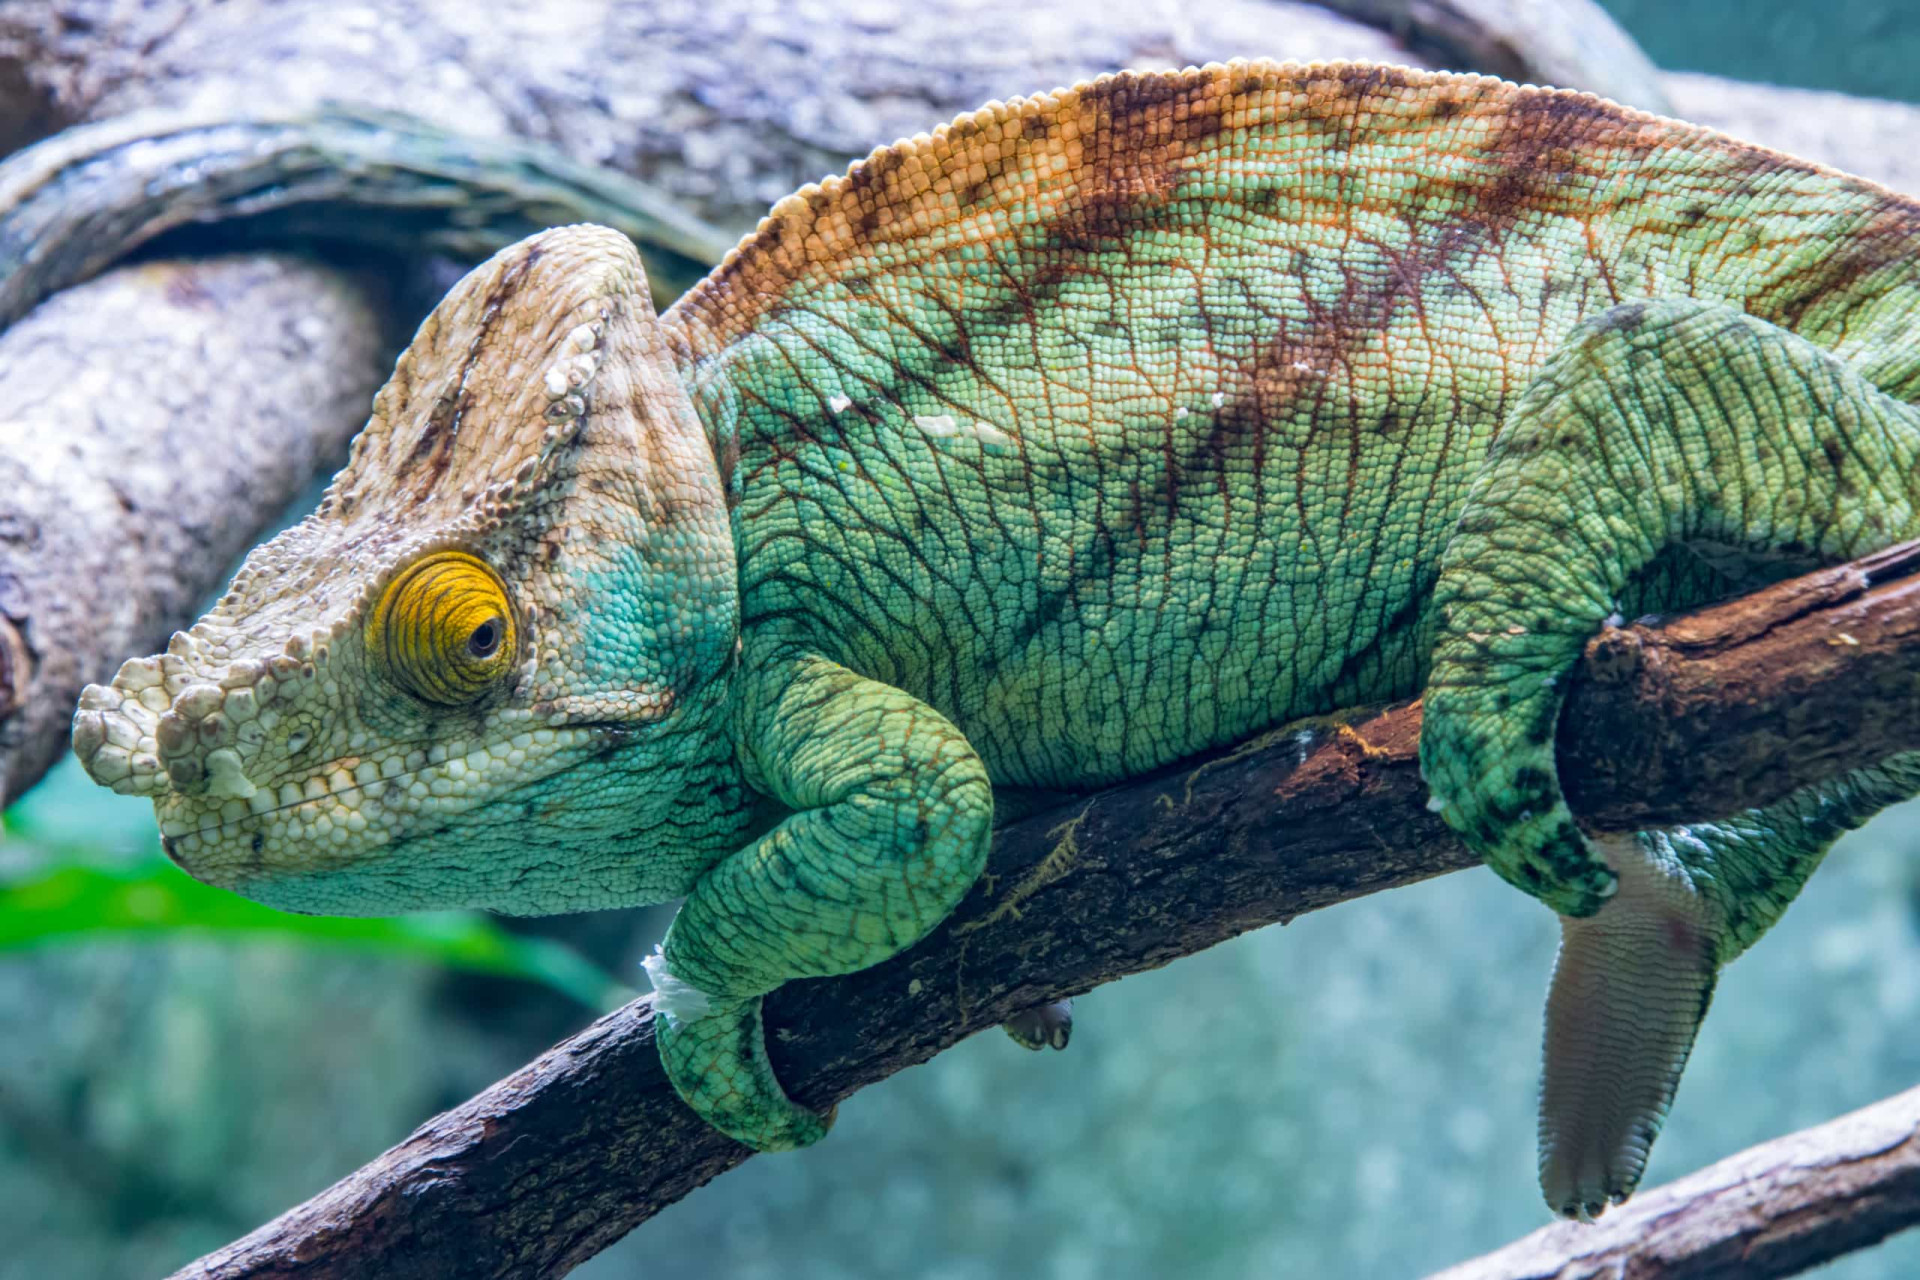 <p>One of the largest chameleons, pictured is a male with its distinctive orange eyelids.</p><p><a href="https://www.msn.com/en-us/community/channel/vid-7xx8mnucu55yw63we9va2gwr7uihbxwc68fxqp25x6tg4ftibpra?cvid=94631541bc0f4f89bfd59158d696ad7e">Follow us and access great exclusive content every day</a></p>